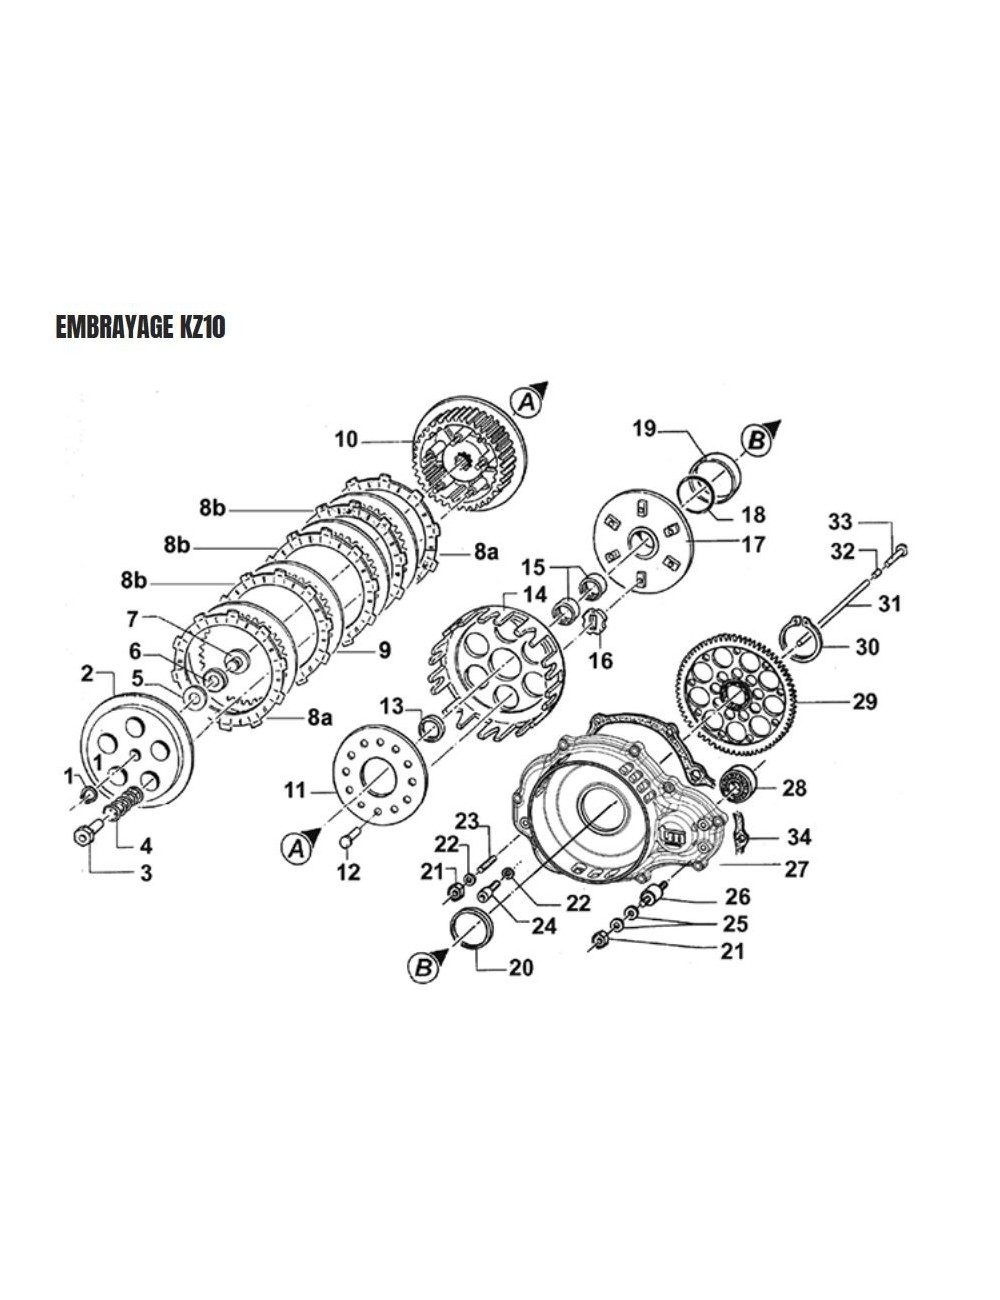 (7) Naked clutch release bearing TM